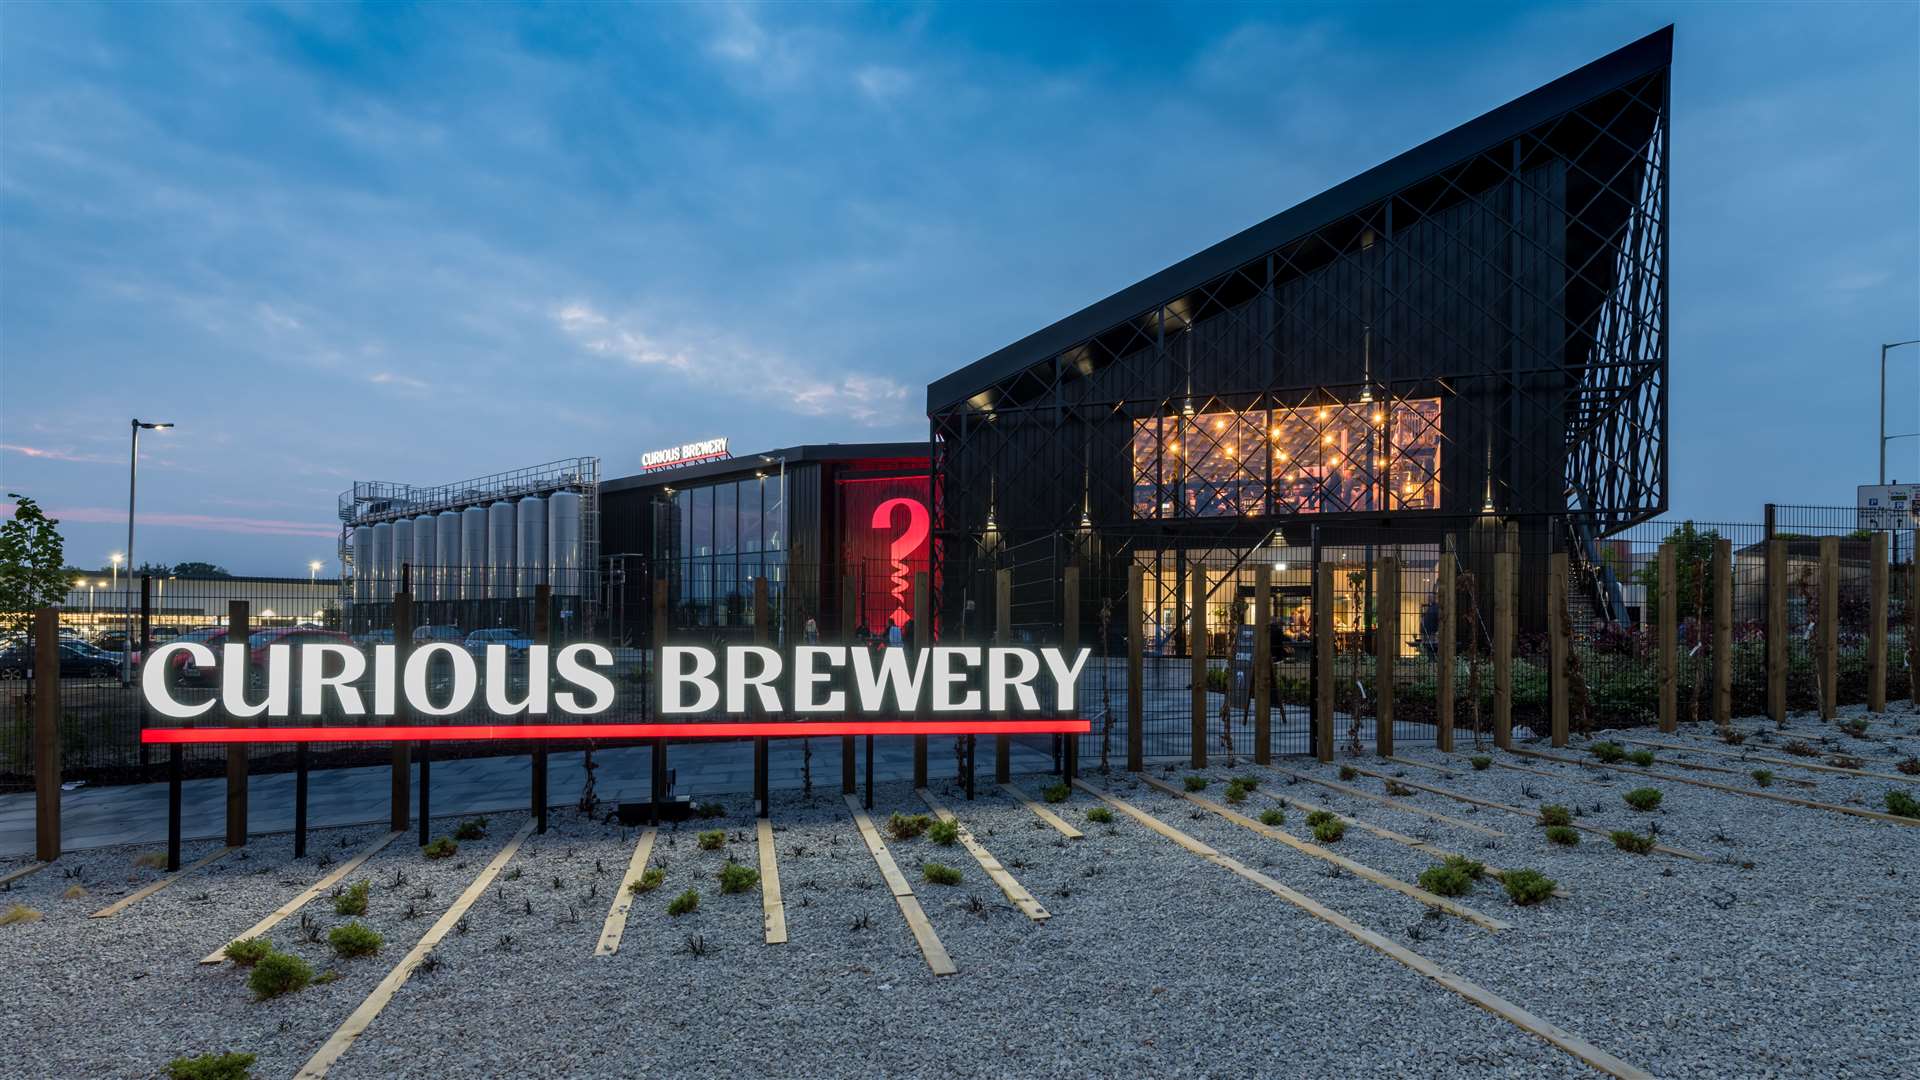 The Curious Brewery in Ashford is set for new owners